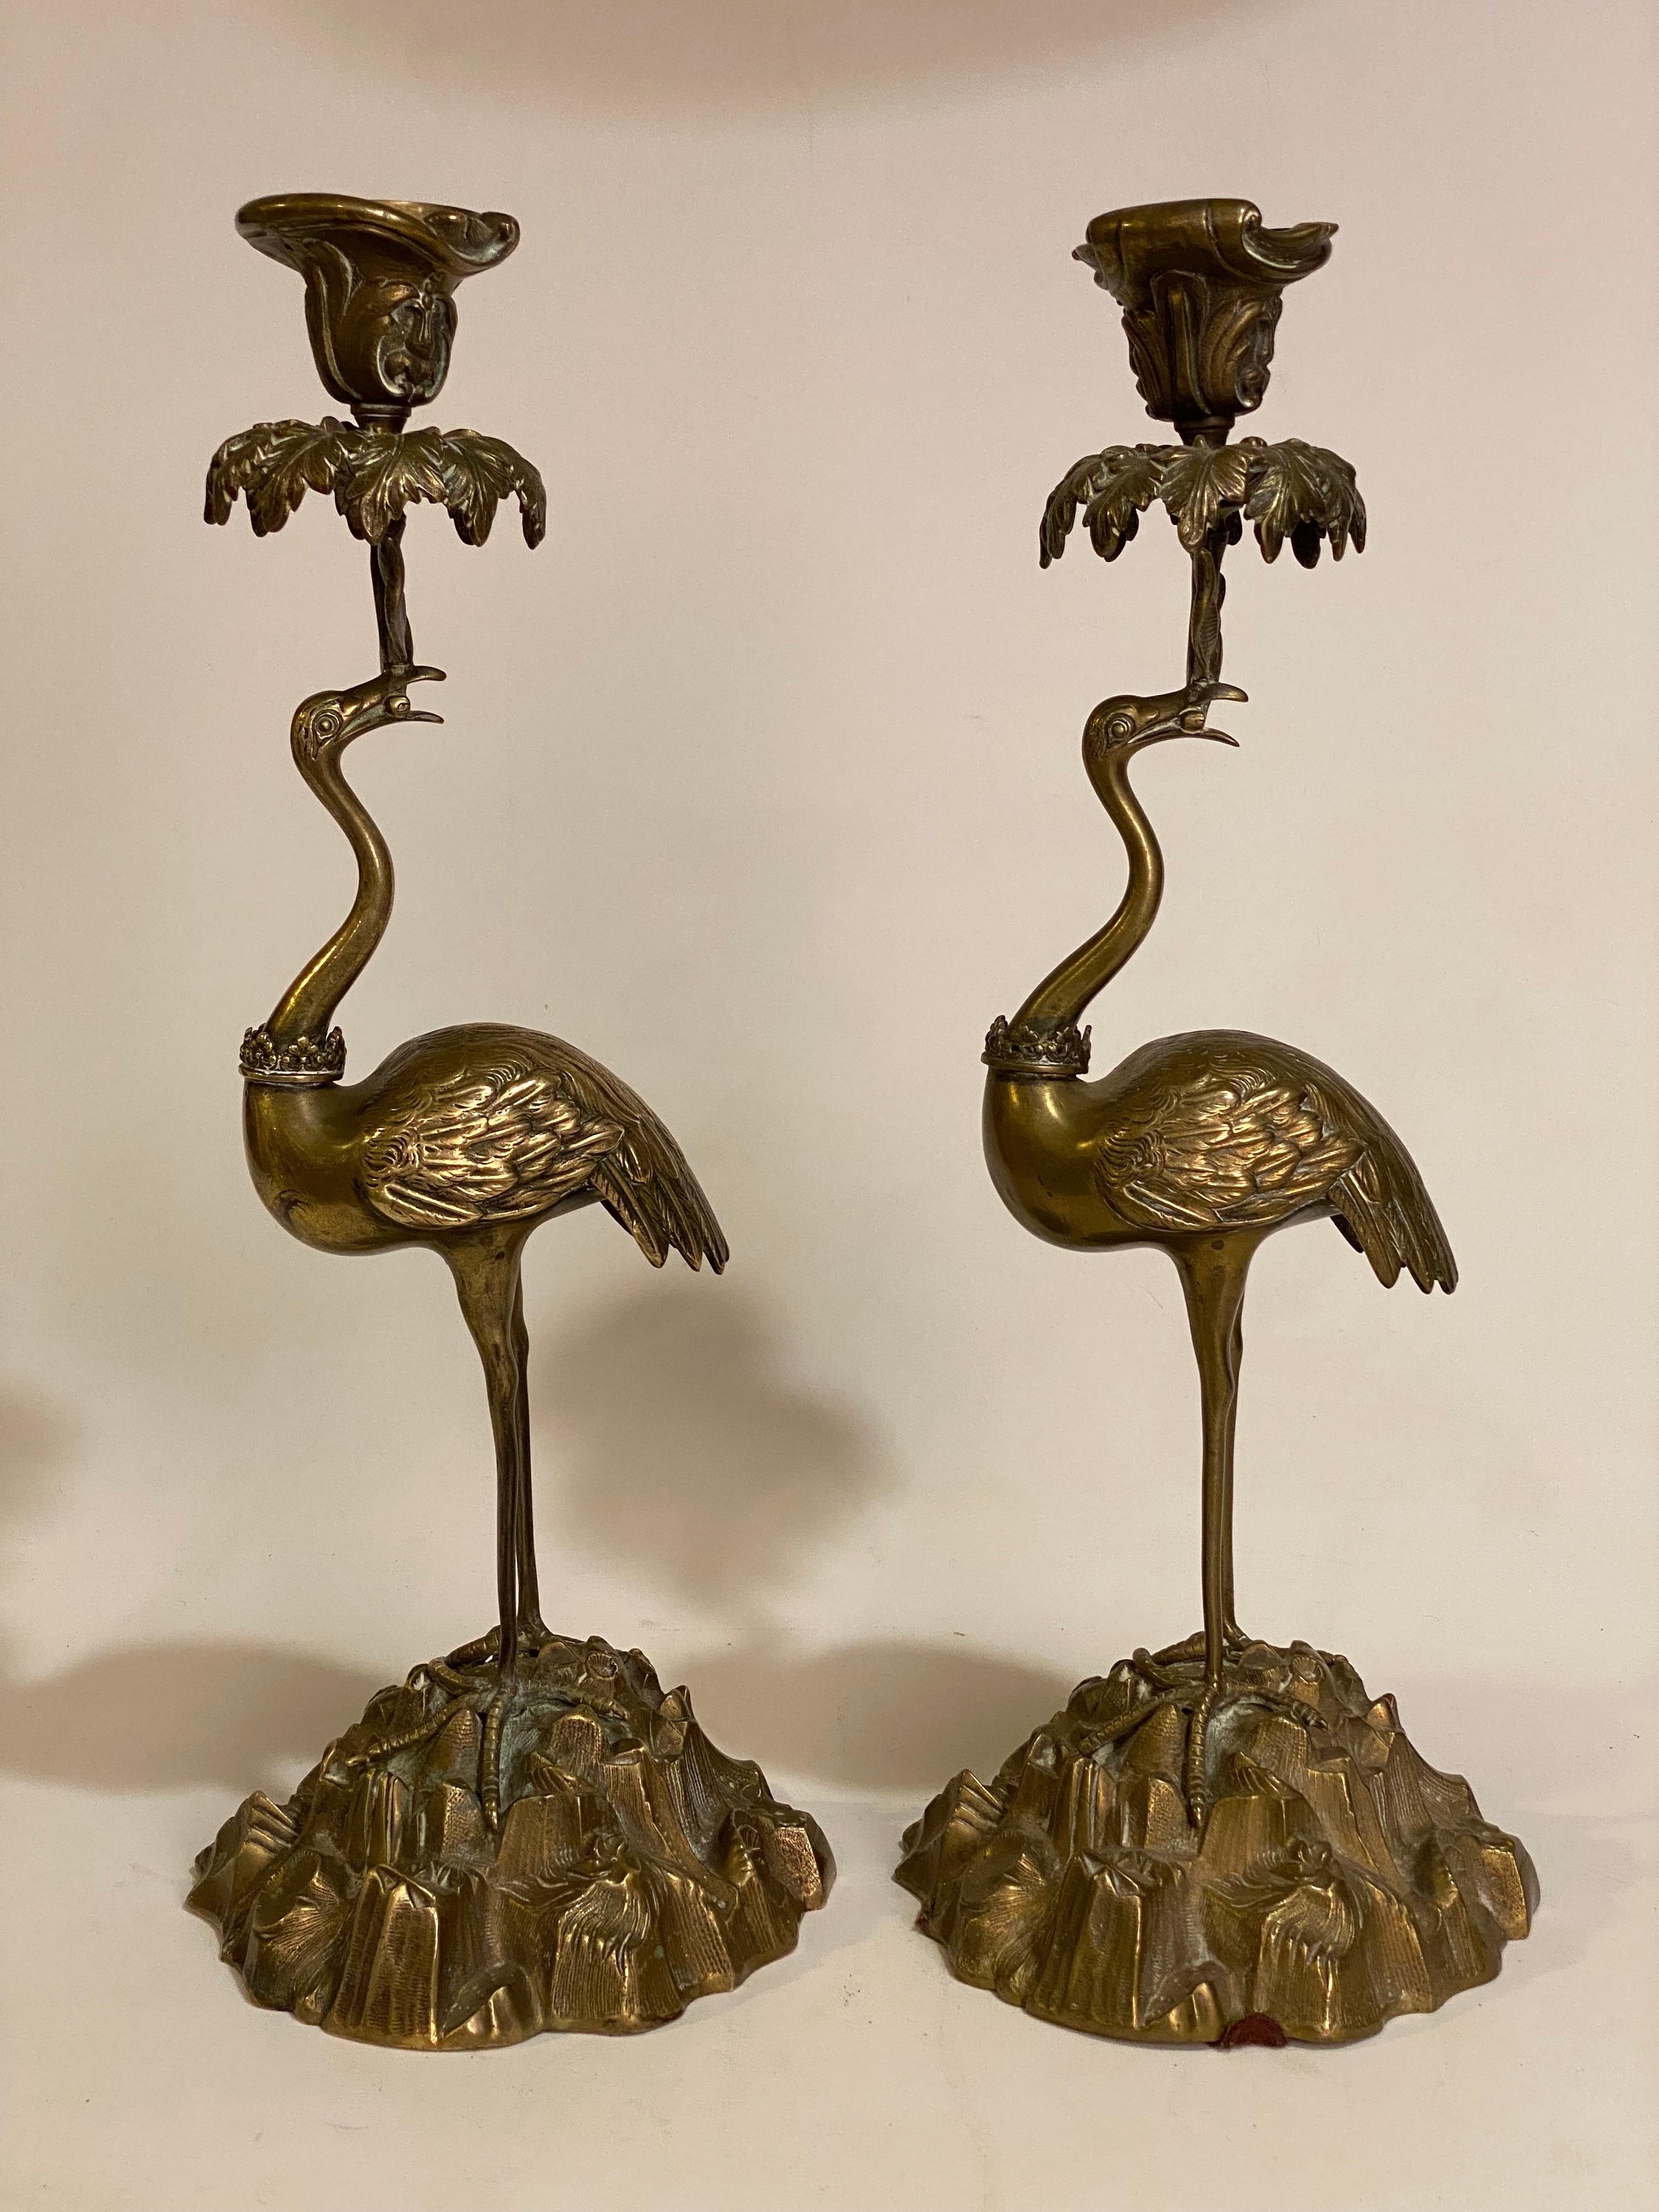 A sumptuously cast pair of bronze flamingo candleholders. From the bases to the tropical palm tree tops, the pair has no equal for precision or decorative appeal. The flamingos set upon a rocky base of sea shells, sea plants  topped with palm trees